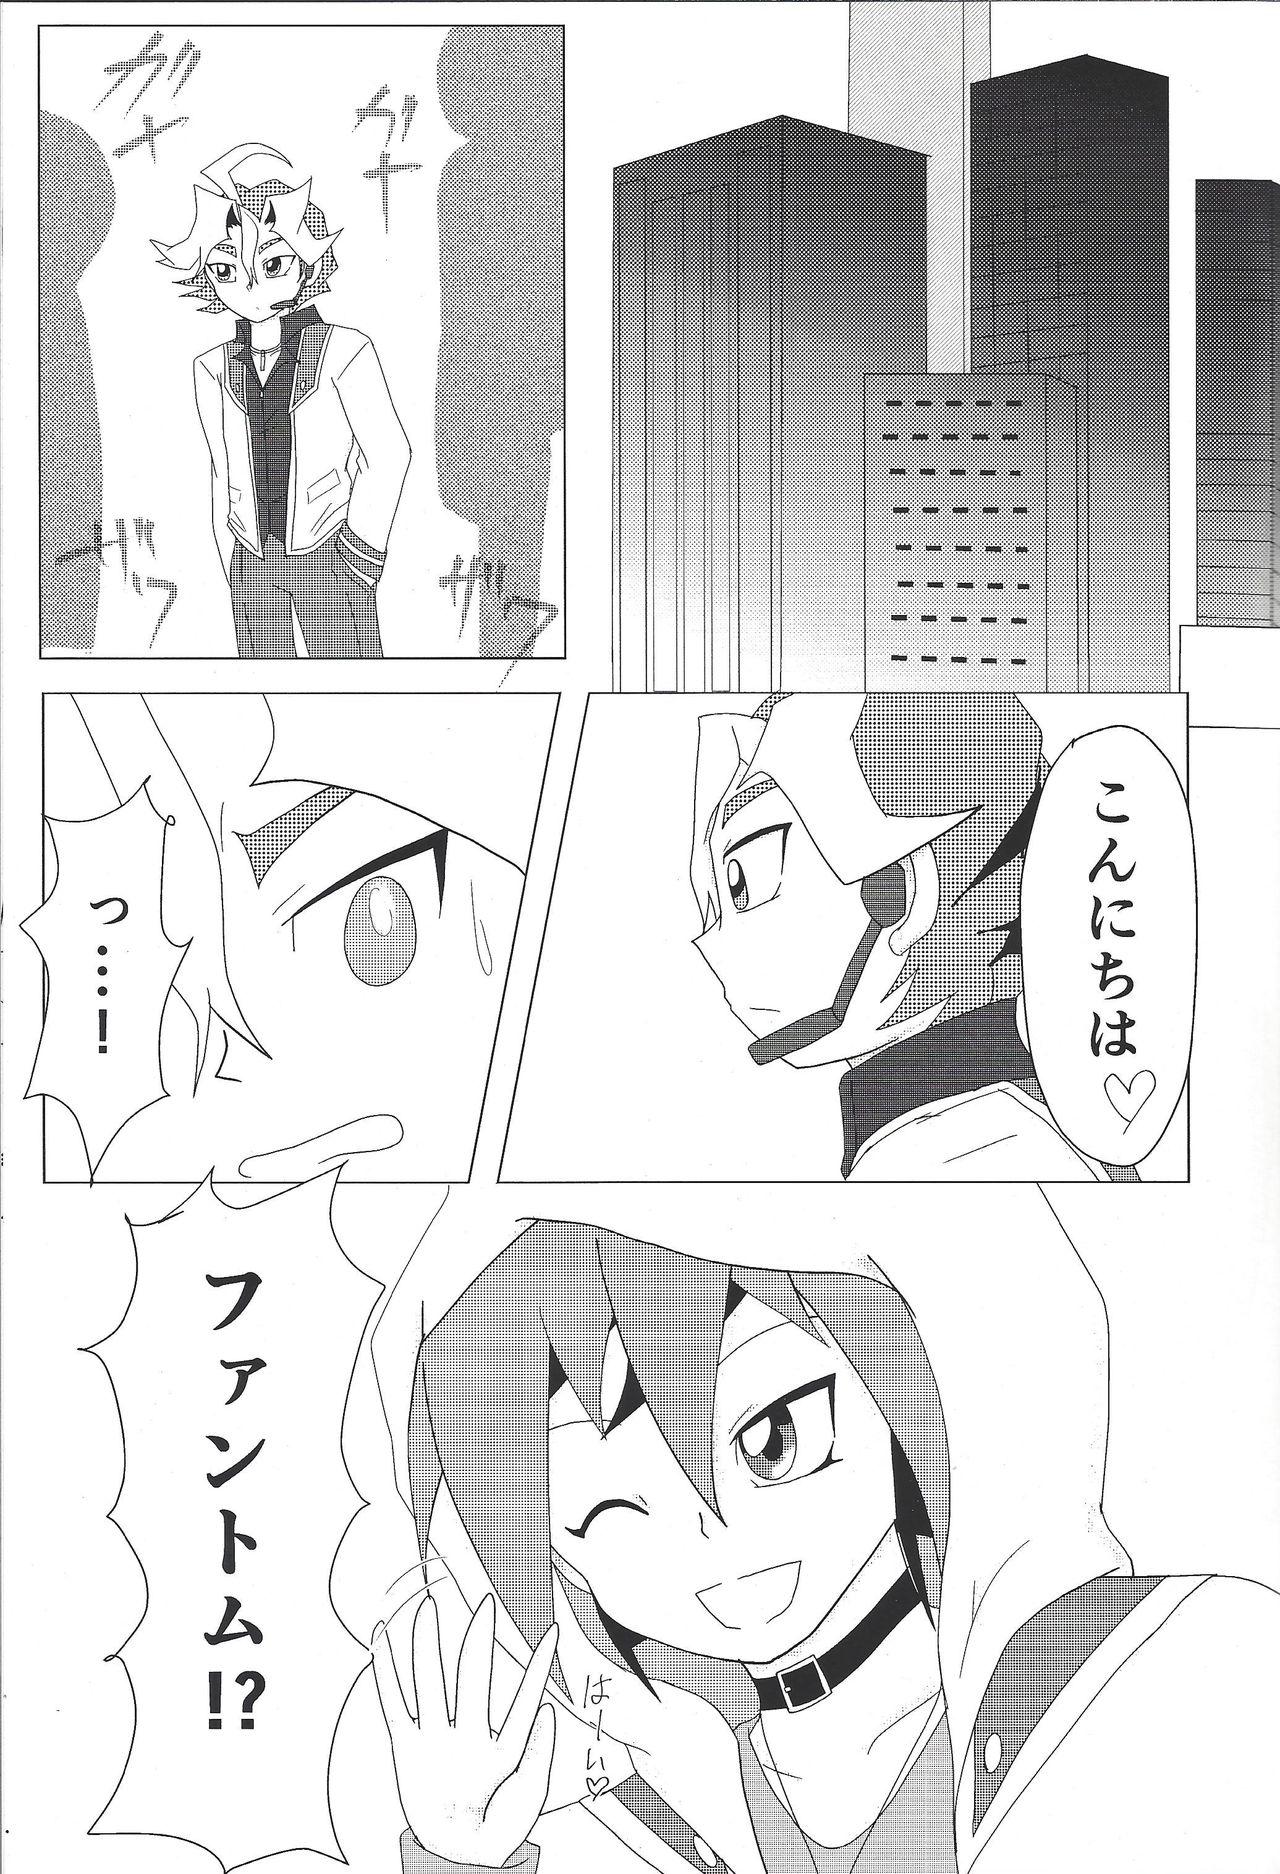 Bhabi What you are, What you do, What you say - Yu-gi-oh arc-v Milfsex - Page 3